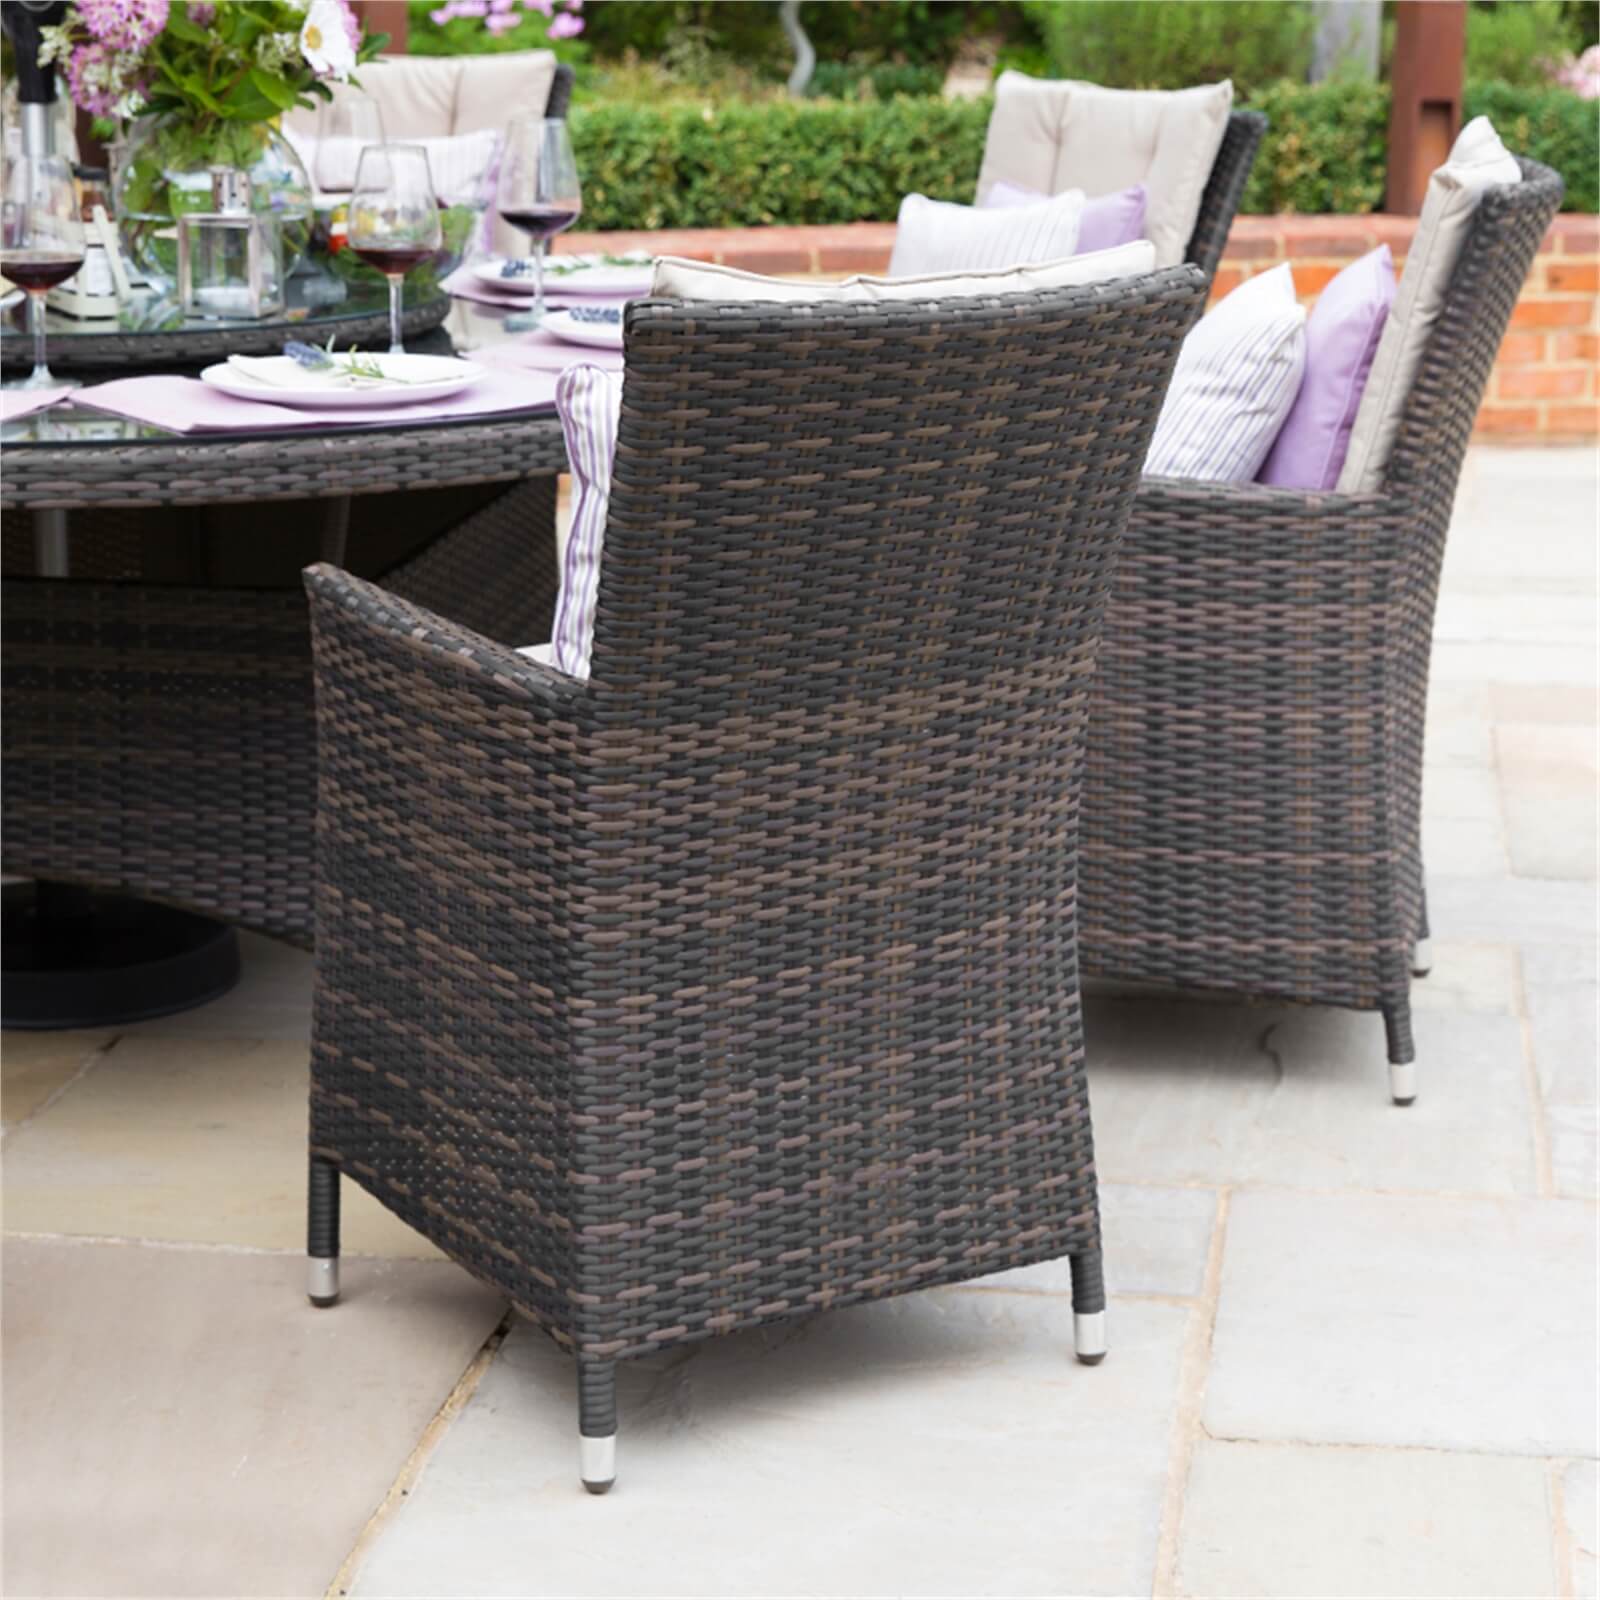 Nova Florence Rattan 6 Seater Oval Dining Set in Brown